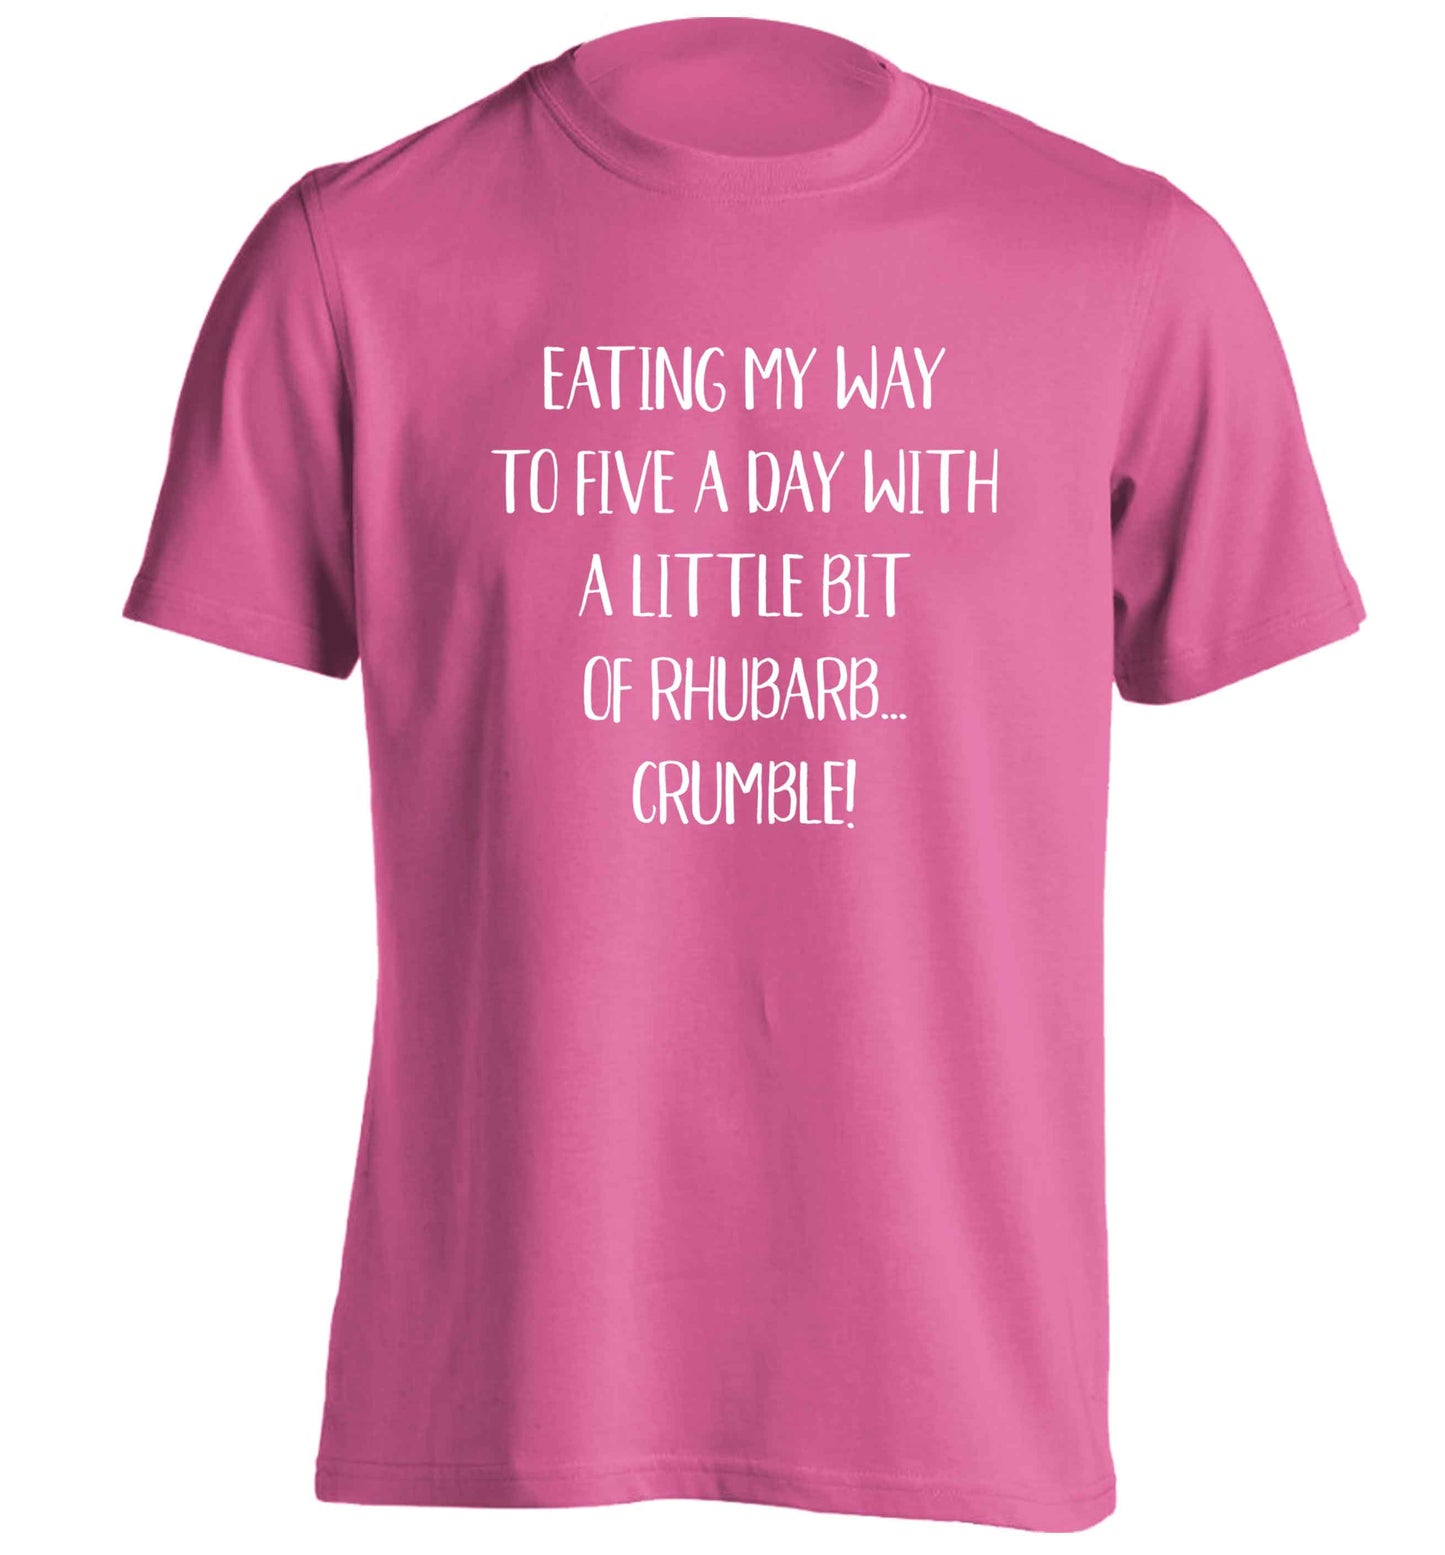 Eating my way to five a day with a little bit of rhubarb crumble adults unisex pink Tshirt 2XL